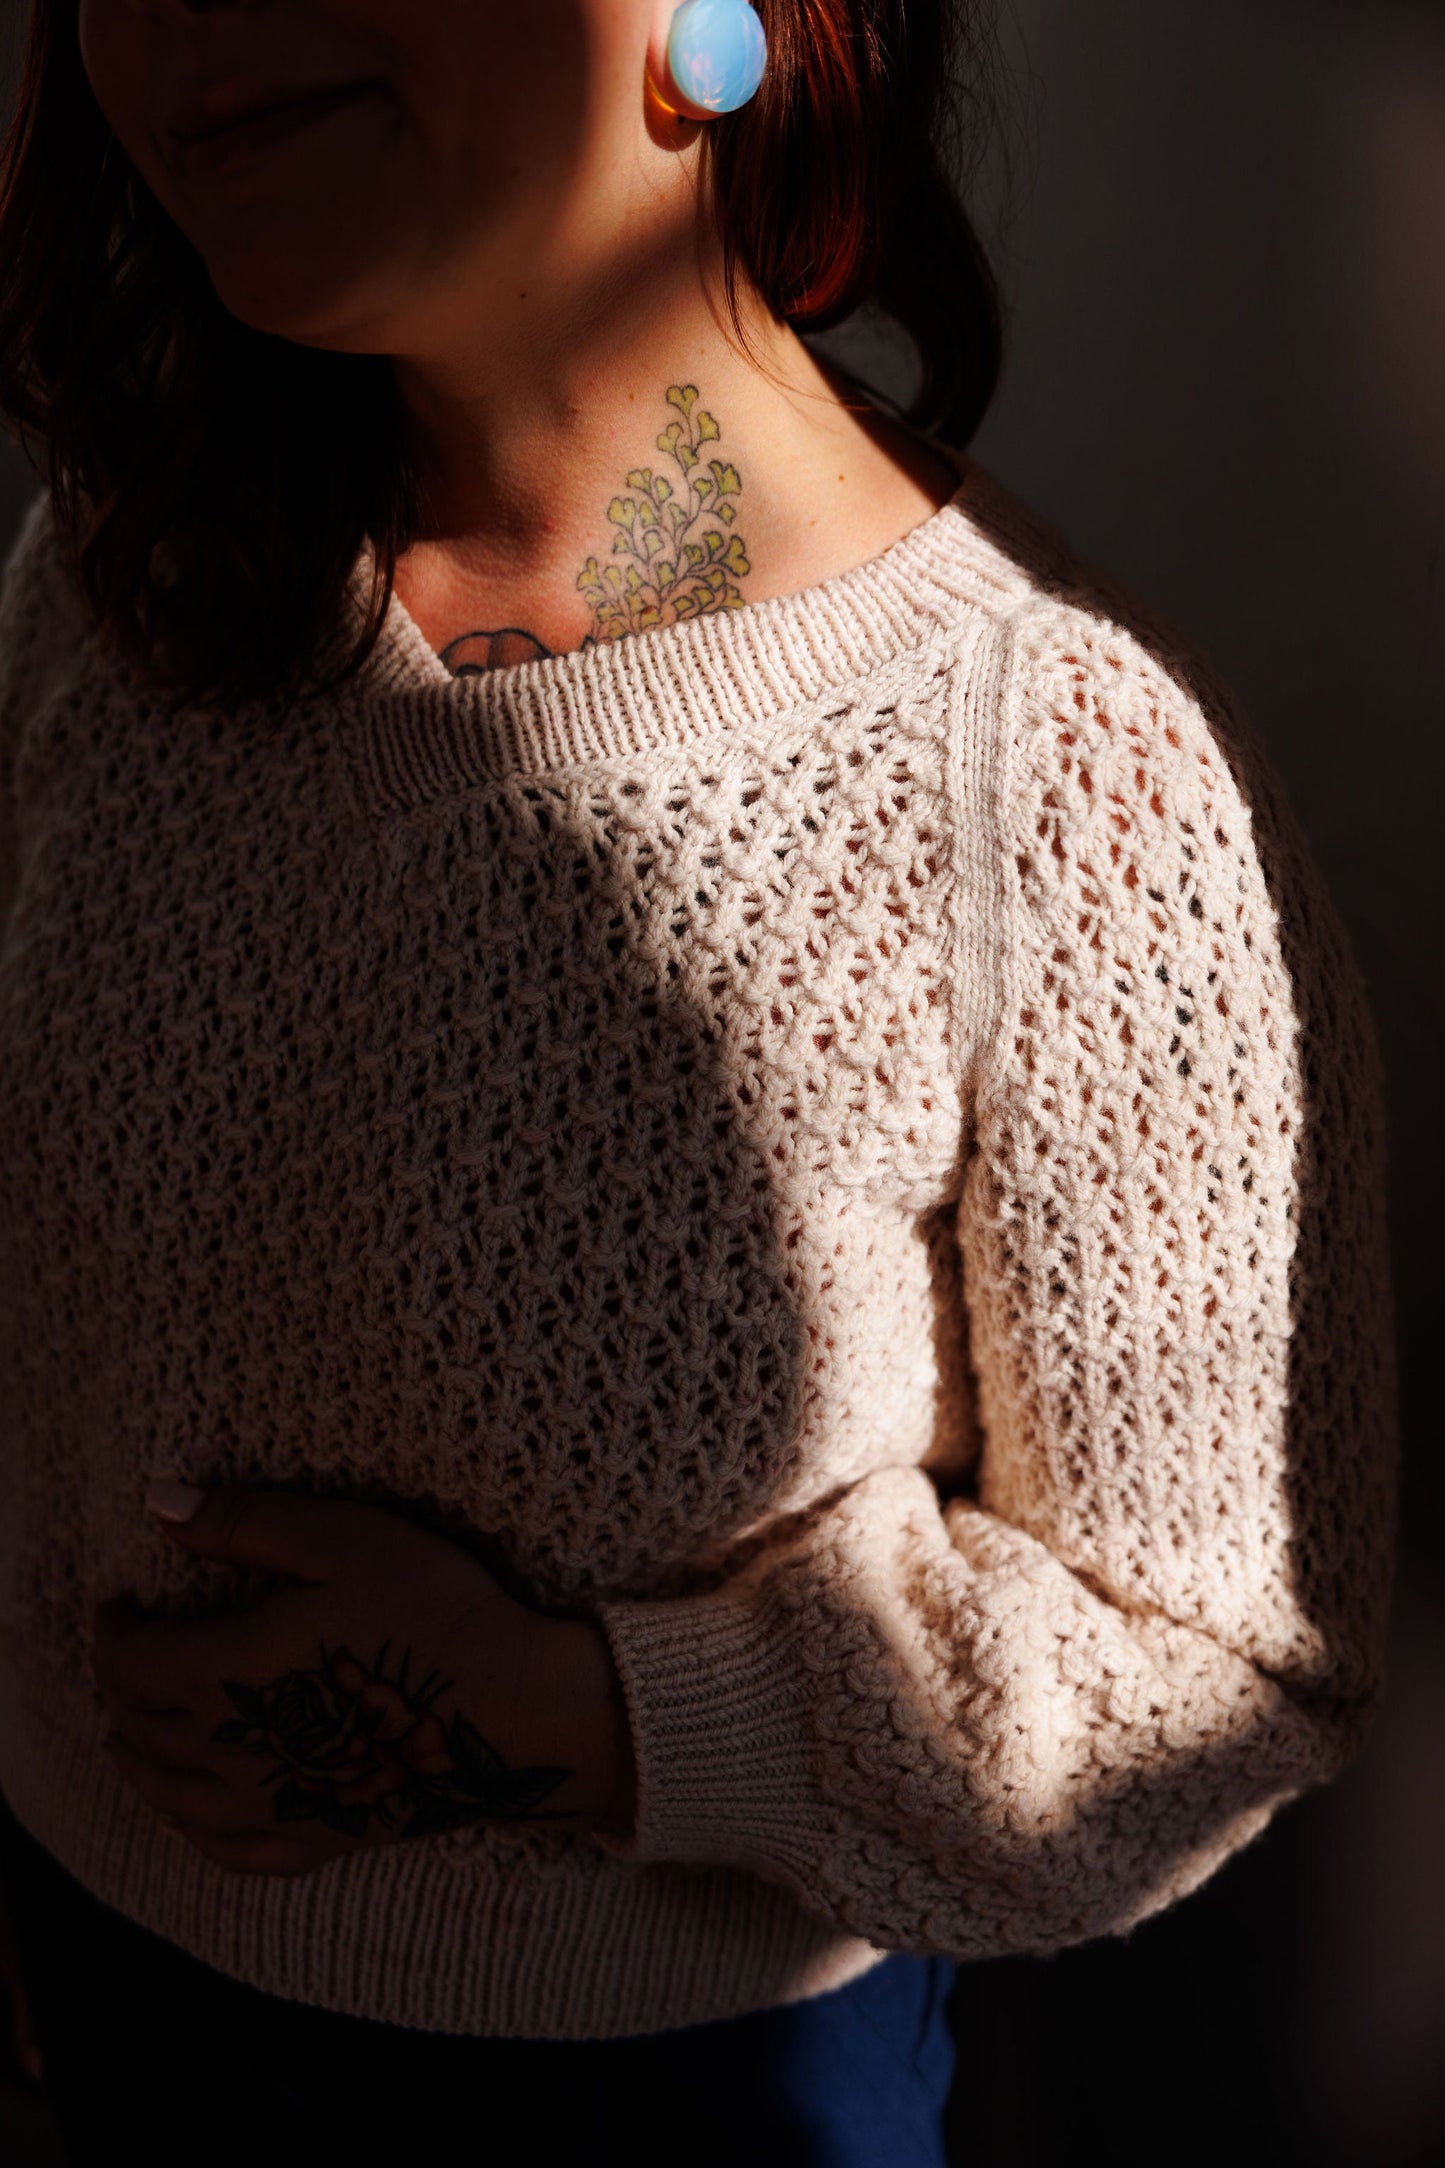 Dramatic lights highlight Elizabeth's neck and shoulder. She is wearing a lace knit sweater that she knit from the Mary Raglan pattern.